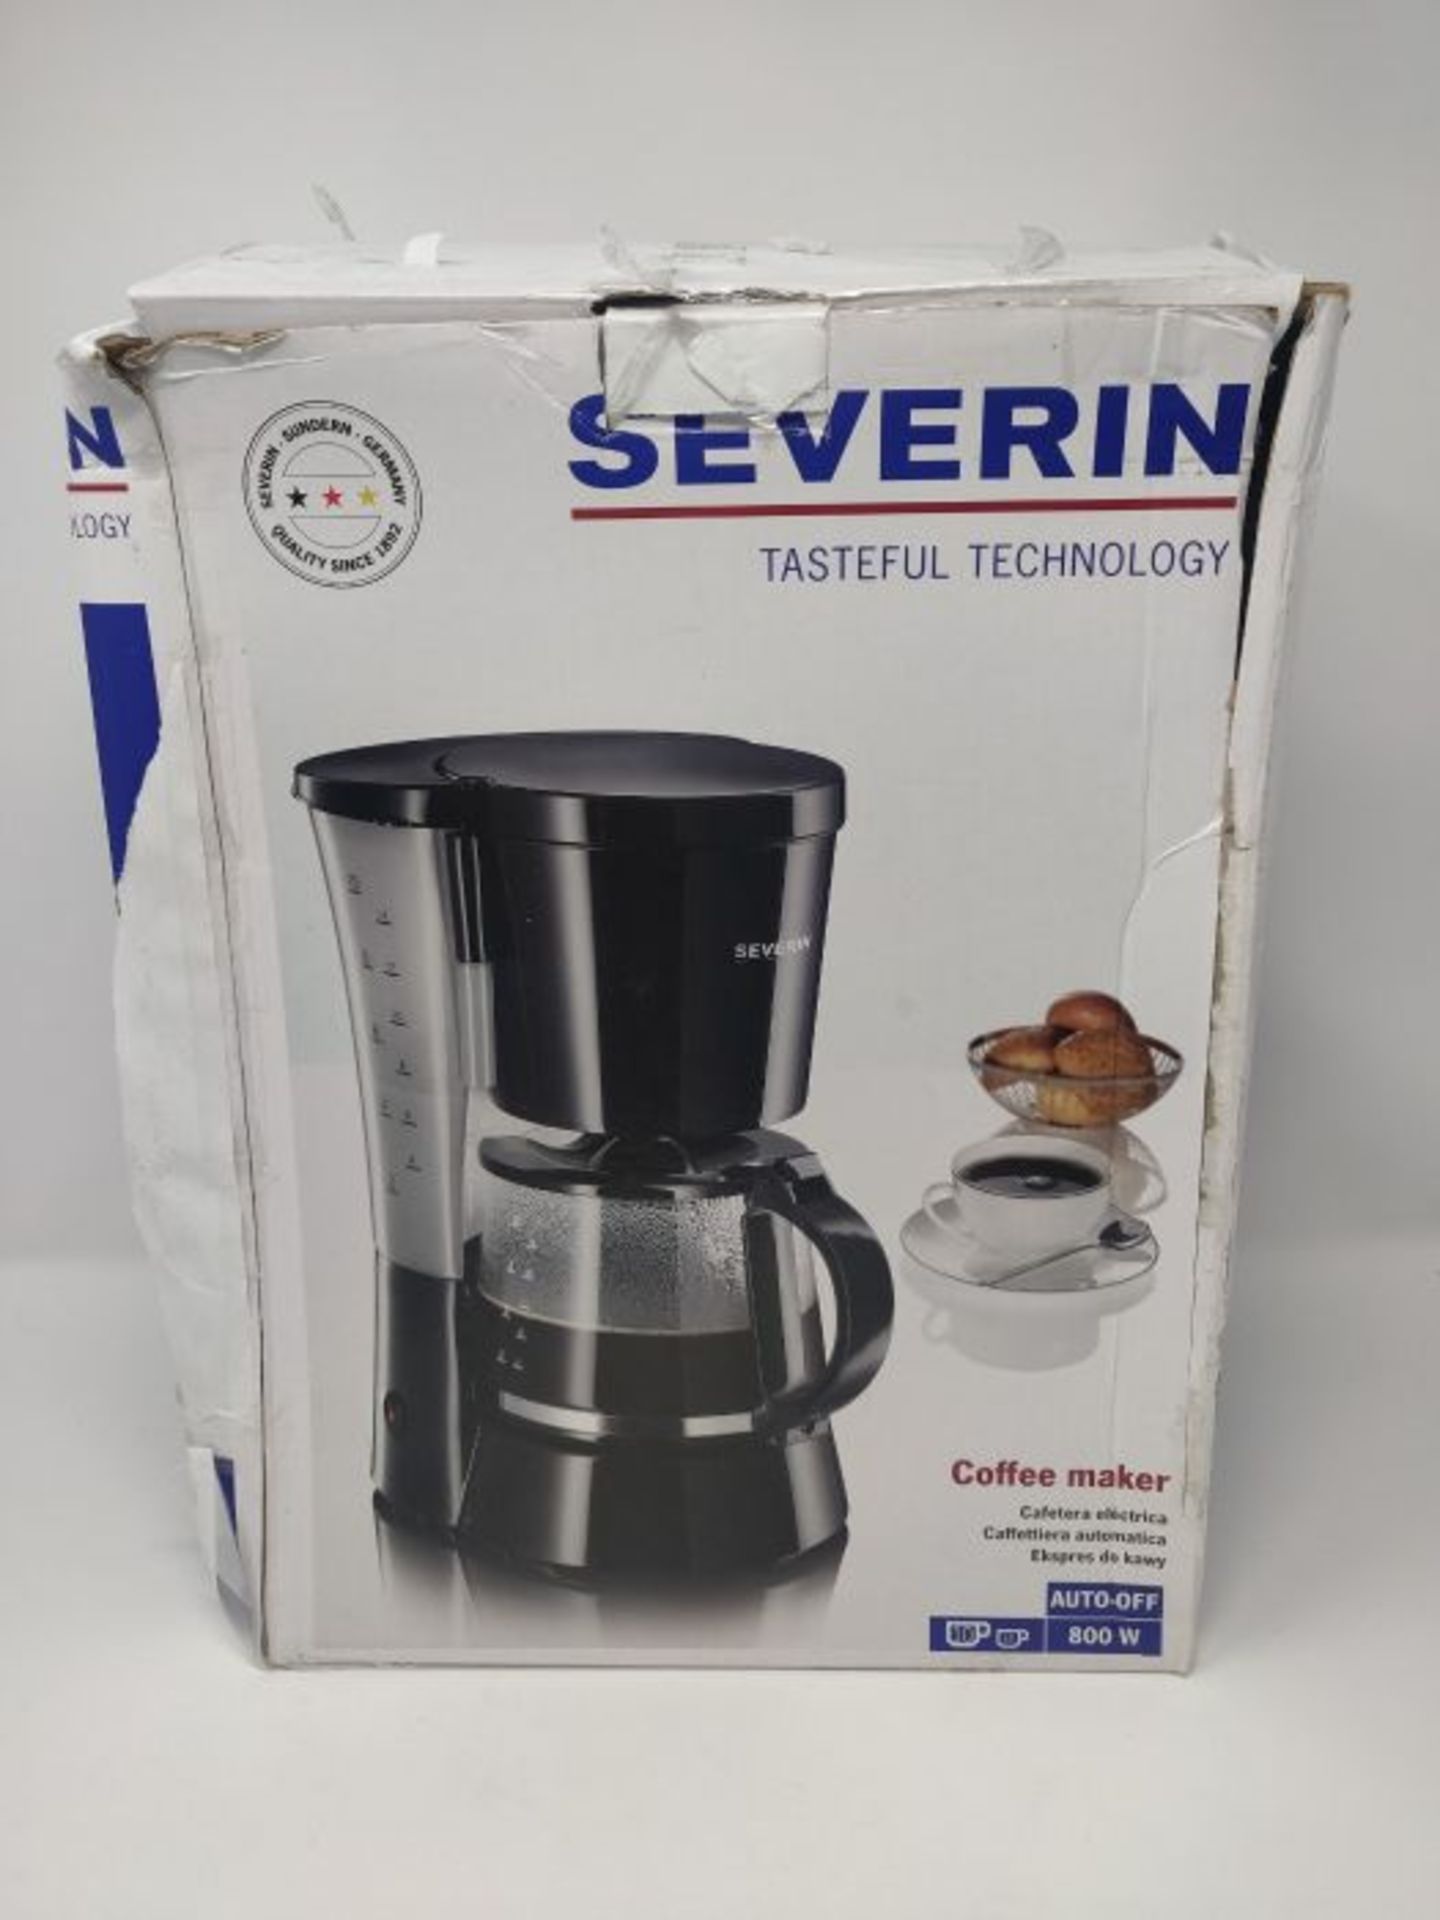 Severin Coffee Maker with 800 W of Power KA 4479, Black - Image 2 of 3